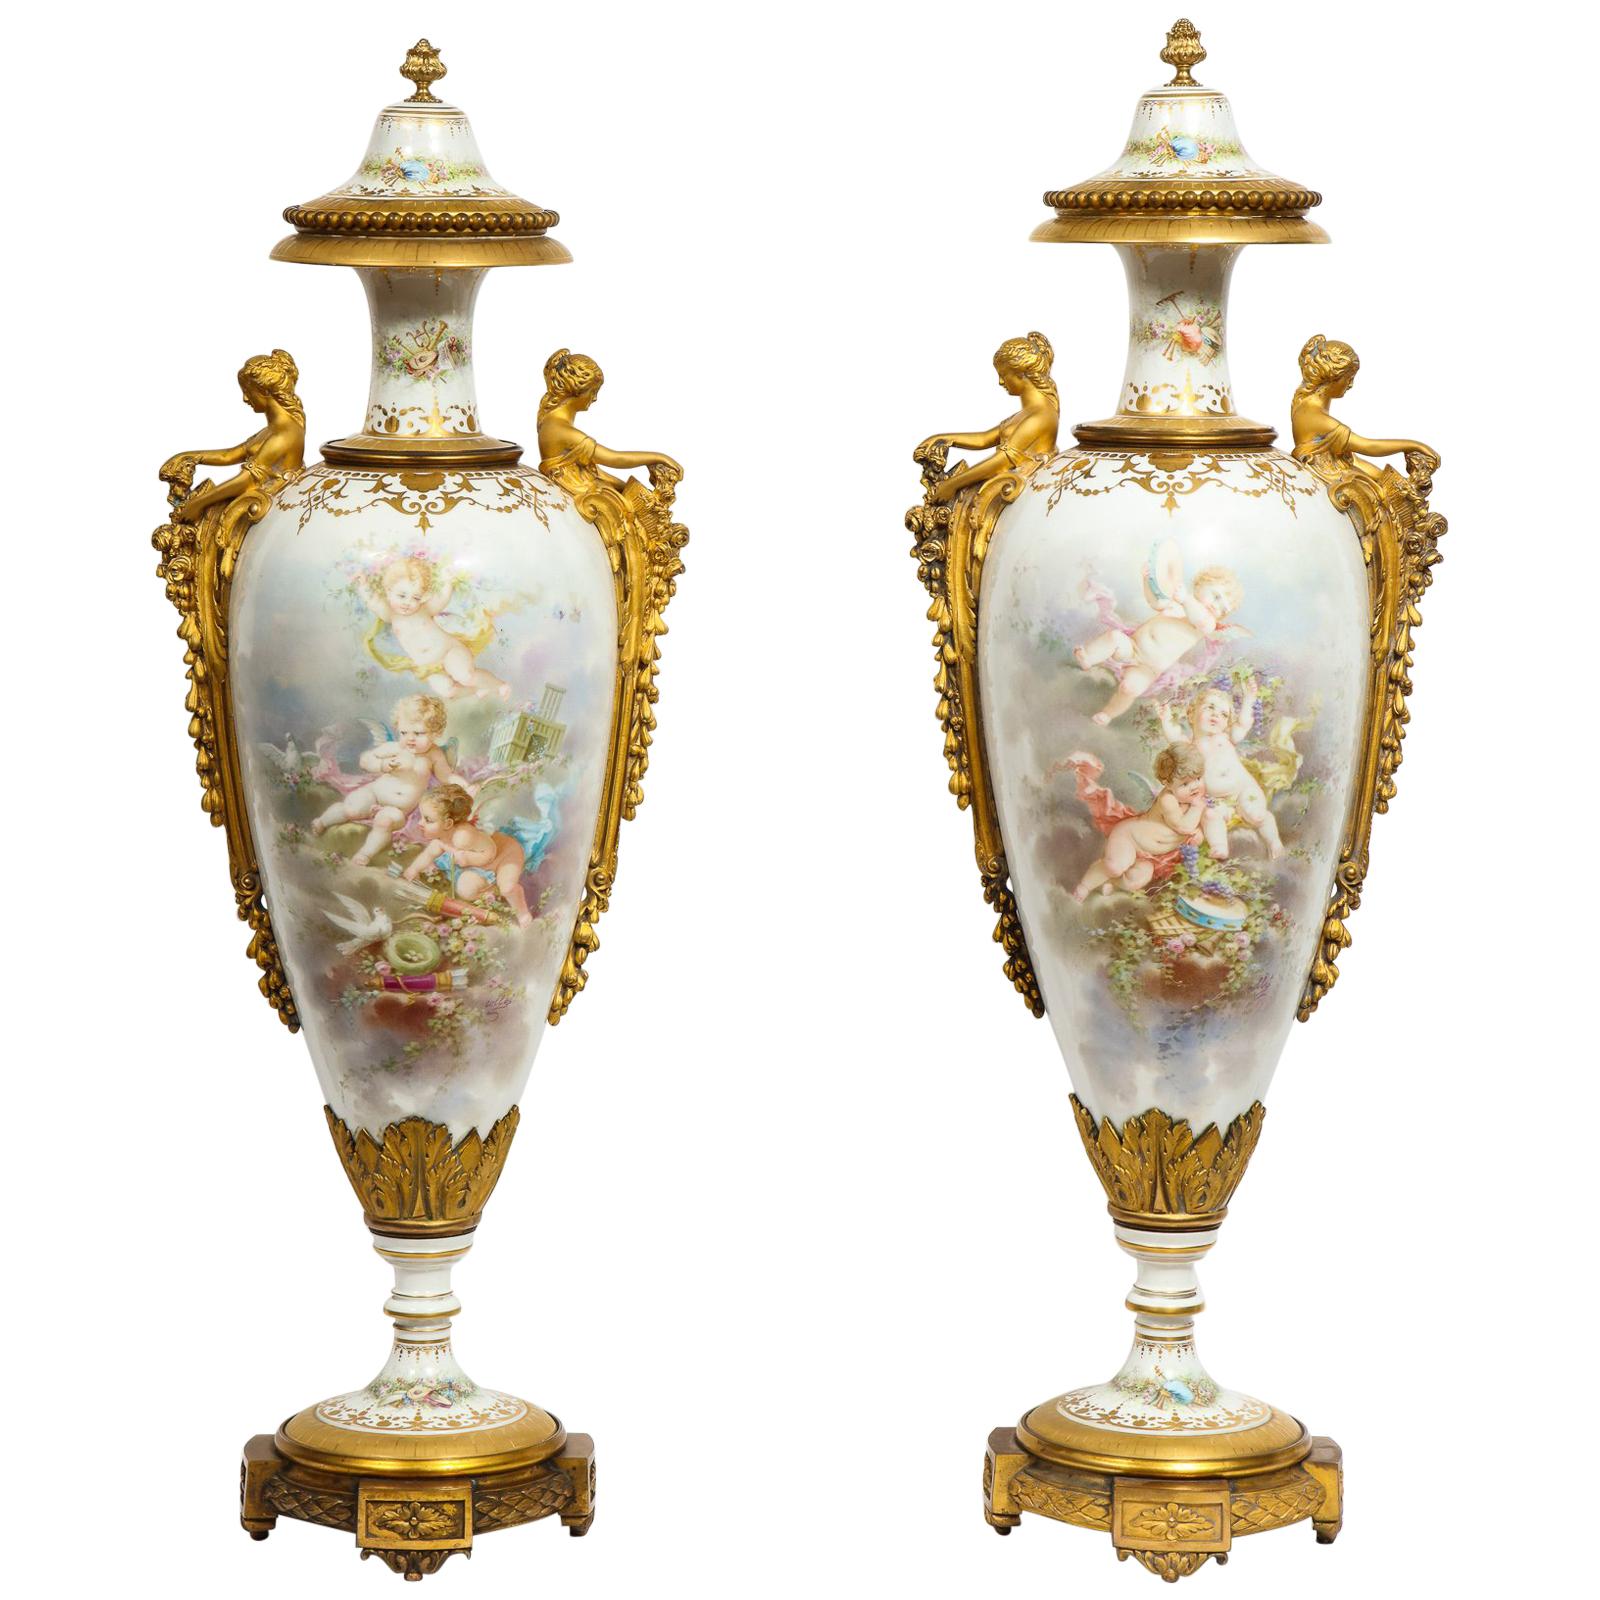 Monumental Pair of French Ormolu-Mounted White Sèvres Porcelain Vases and Covers